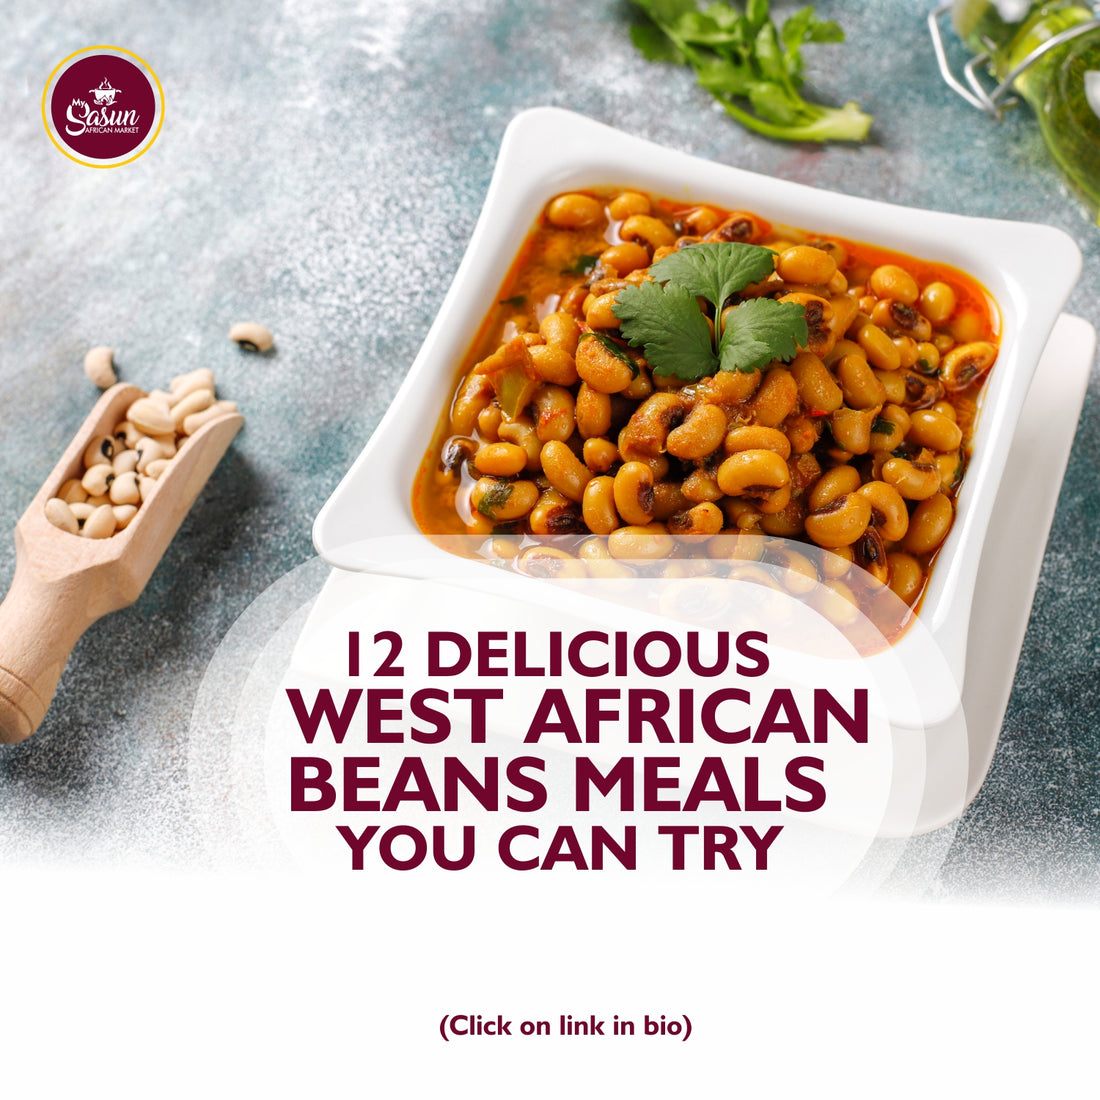 12 DELICIOUS WEST AFRICAN BEANS MEALS YOU CAN TRY